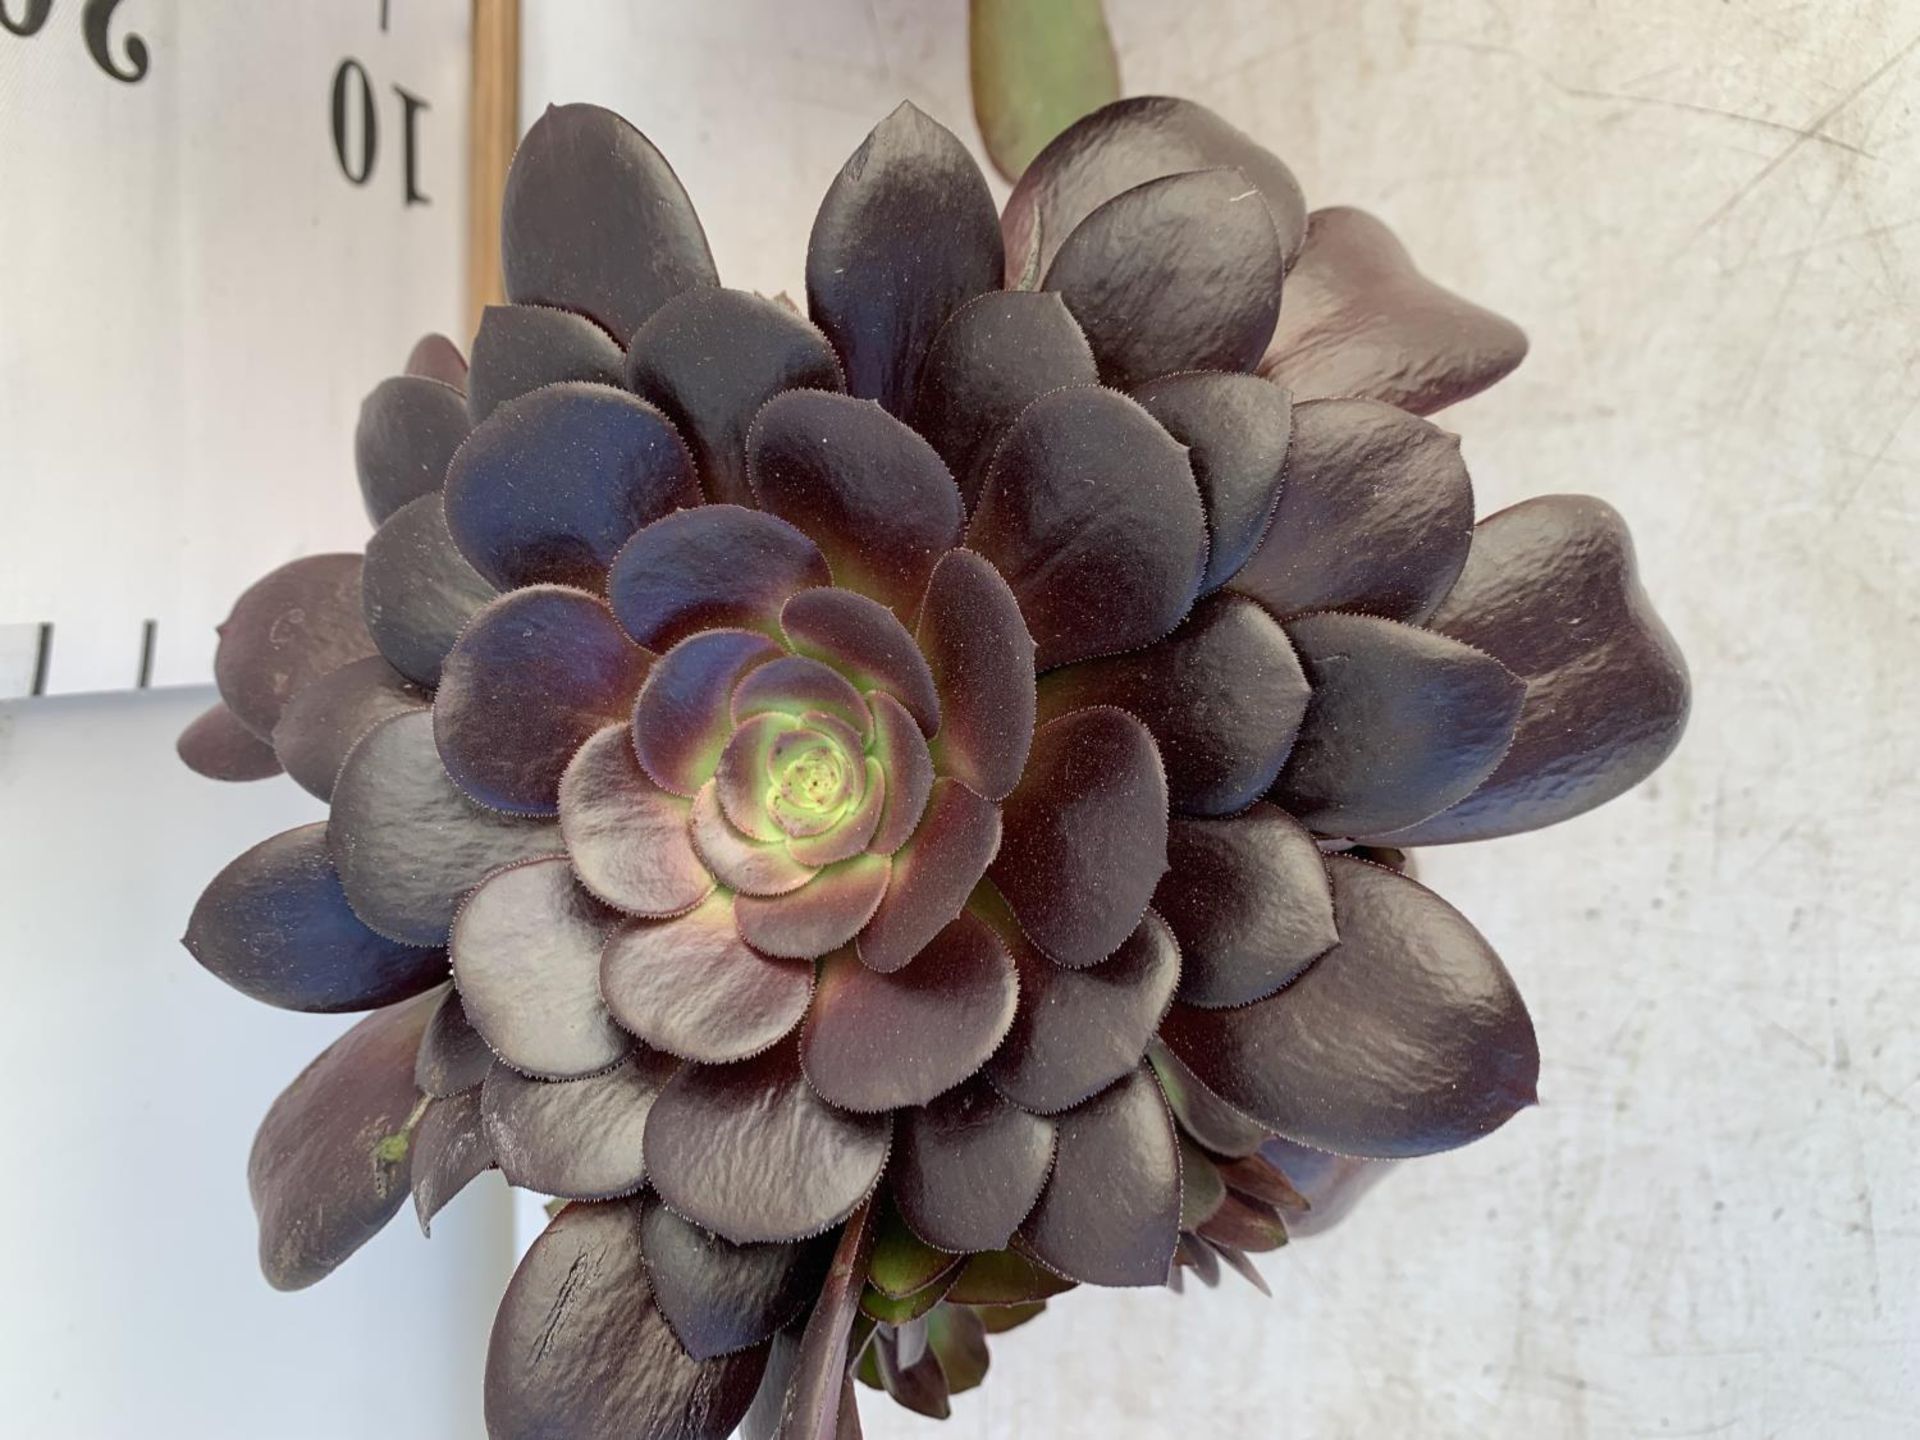 TWO AEONIUM ARBOREUM VELOURS IN 1 LTR POTS 25CM TALL PLUS VAT TO BE SOLD FOR THE TWO - Image 8 of 8